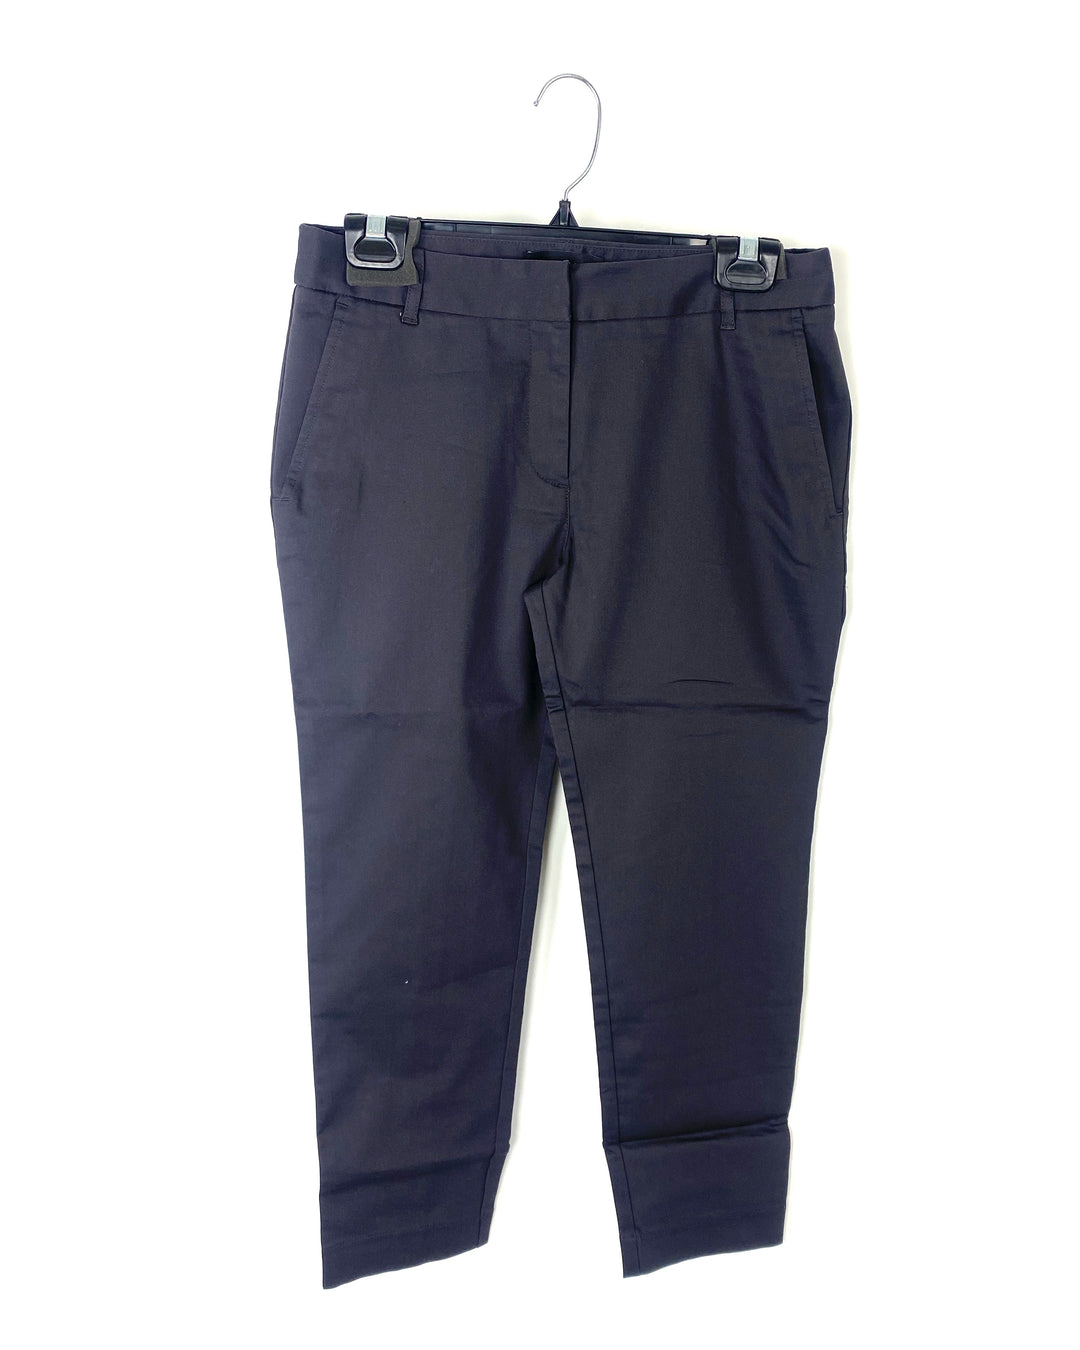 Charcoal Trousers - Size 2, 4, 6 and 8